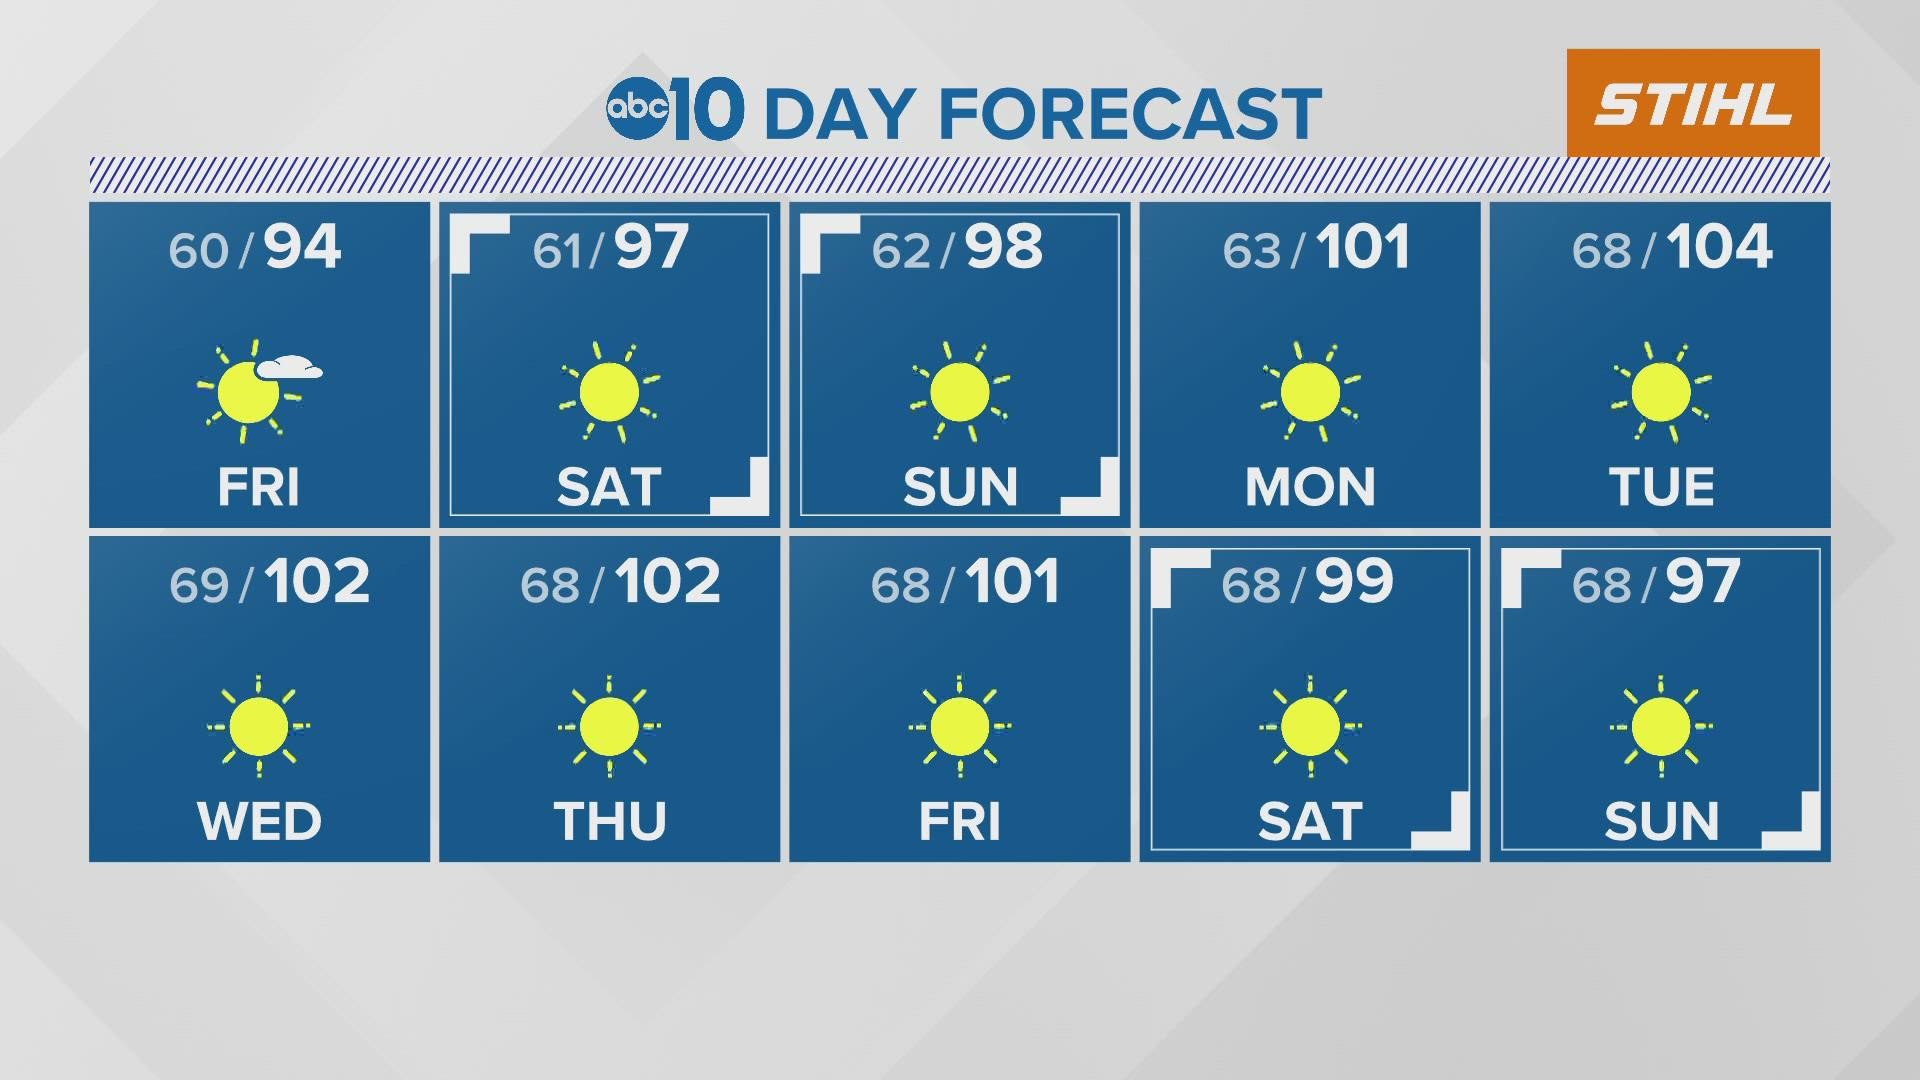 ABC10 Meteorologist Carley Gomez tells us what to expect for the next 10 days of weather.